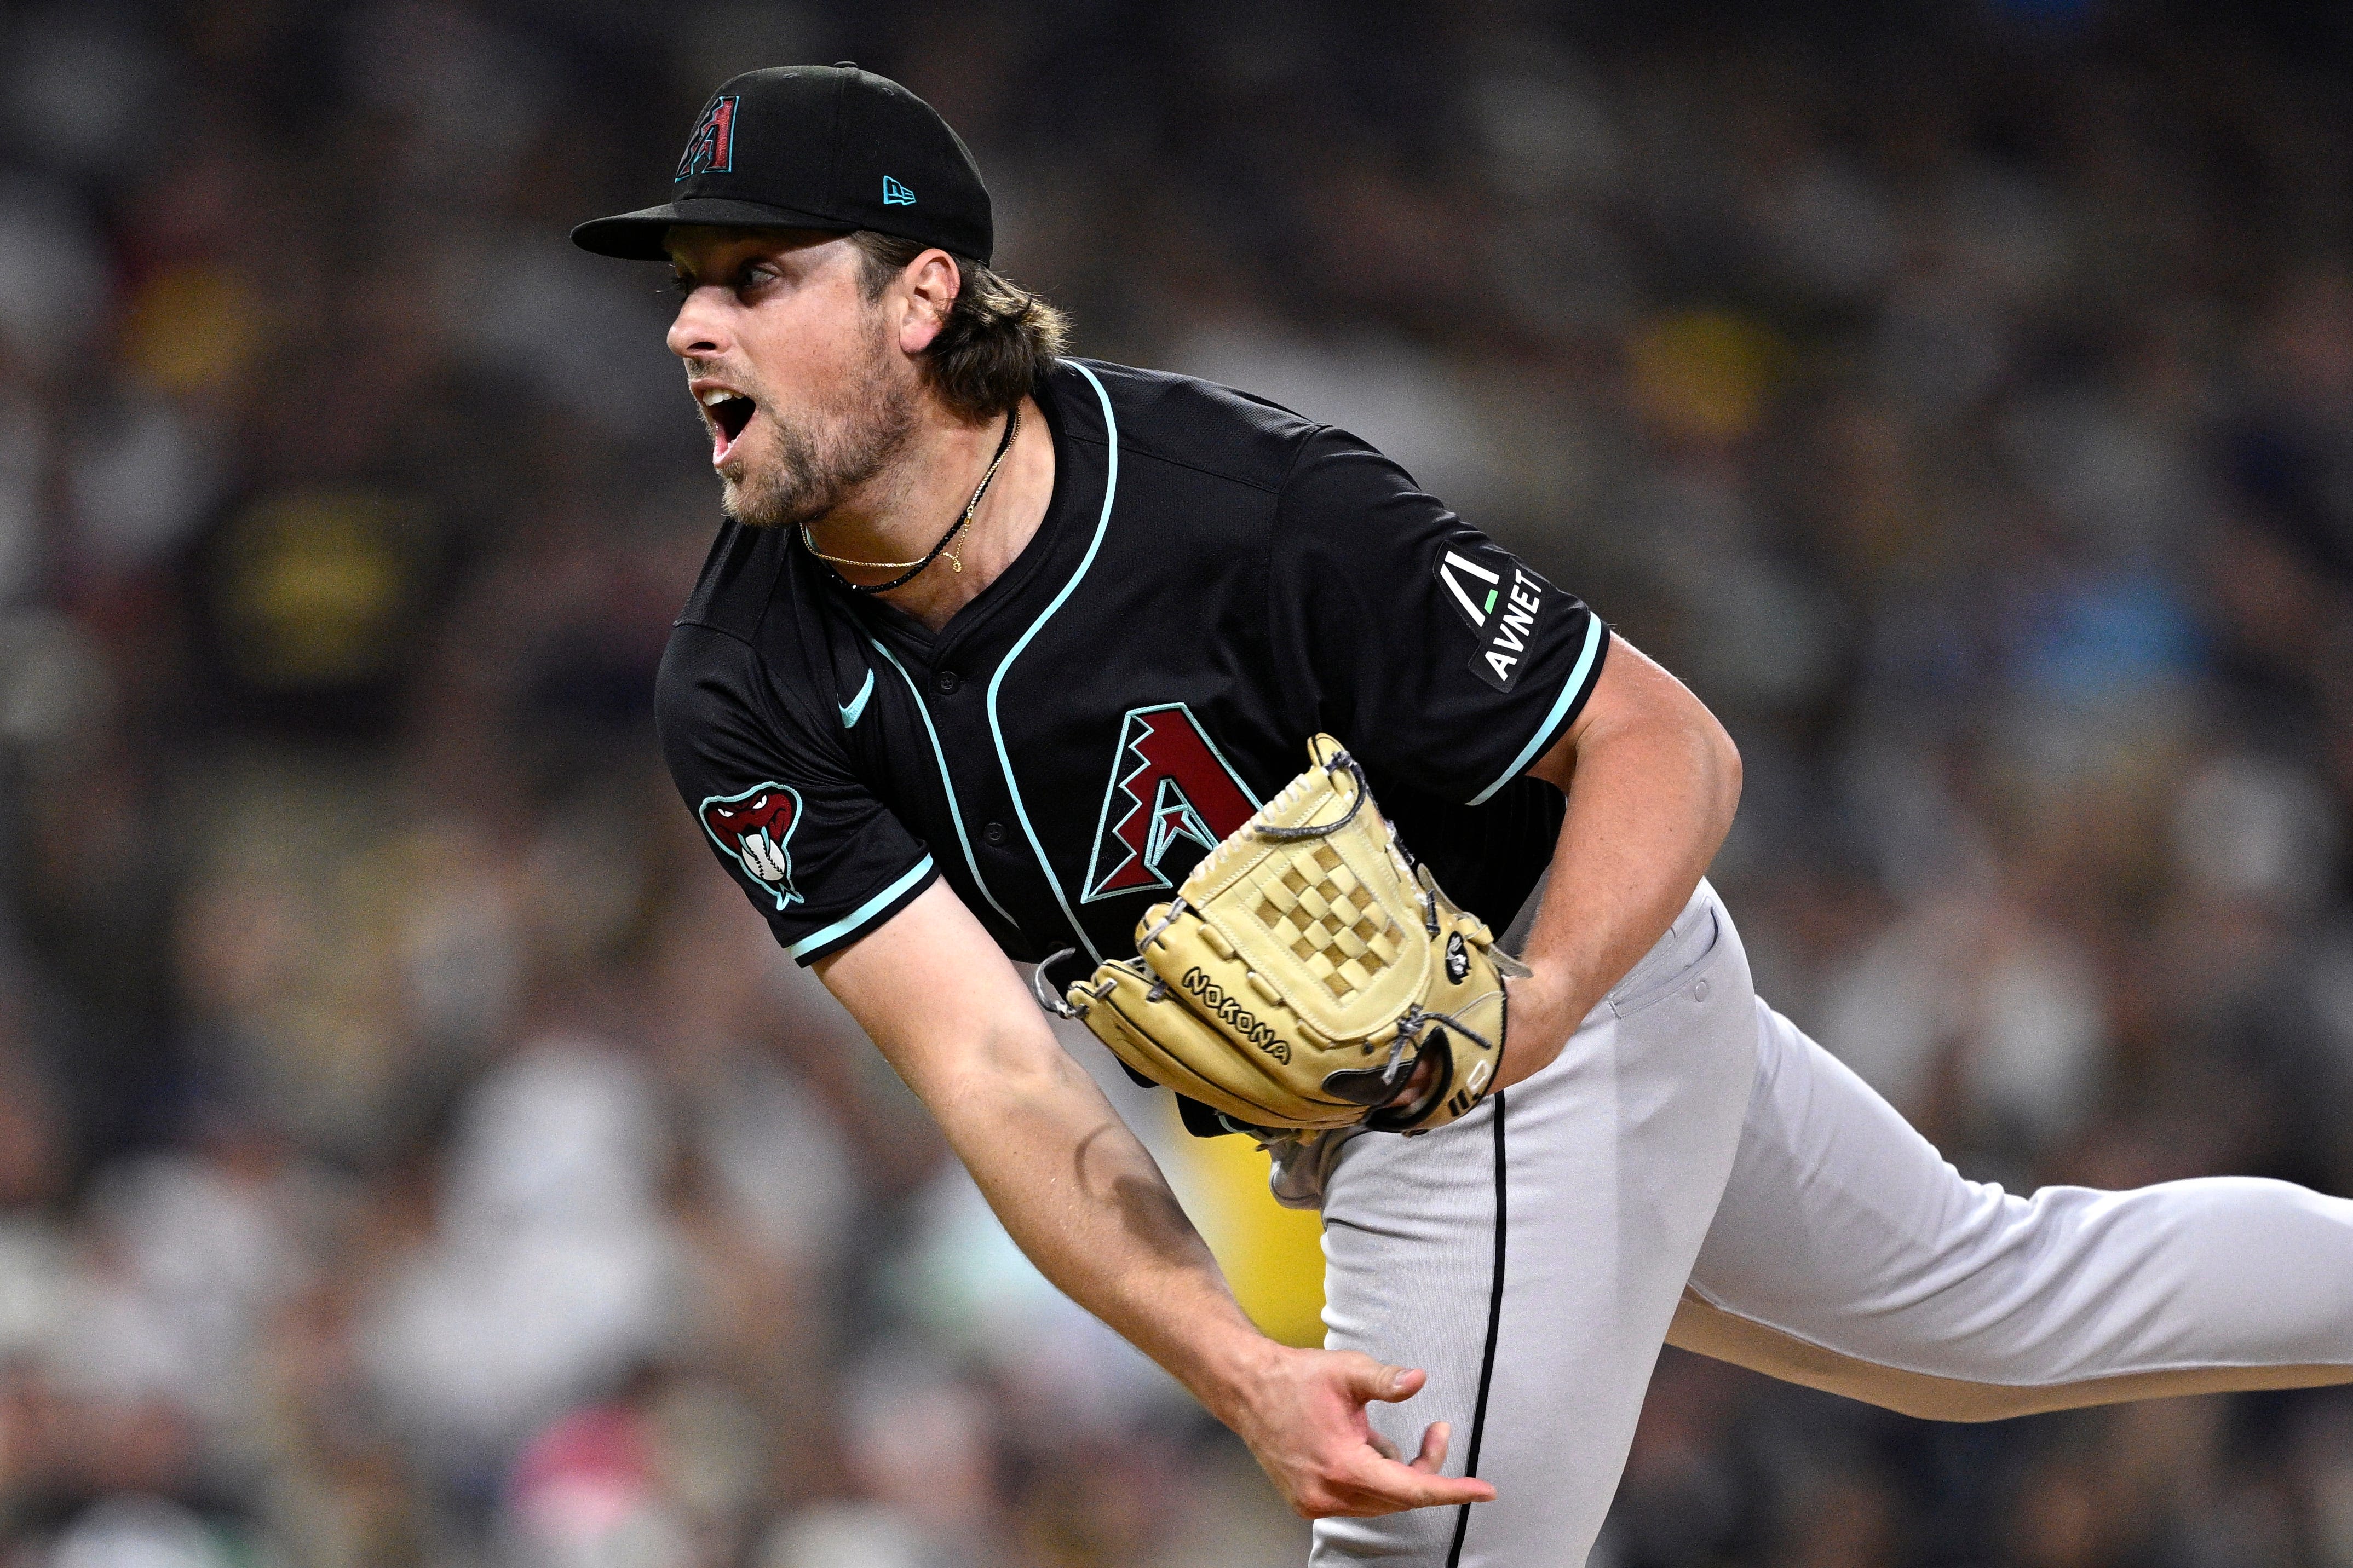 Diamondbacks pitcher Kevin Ginkel found his groove after making this key adjustment